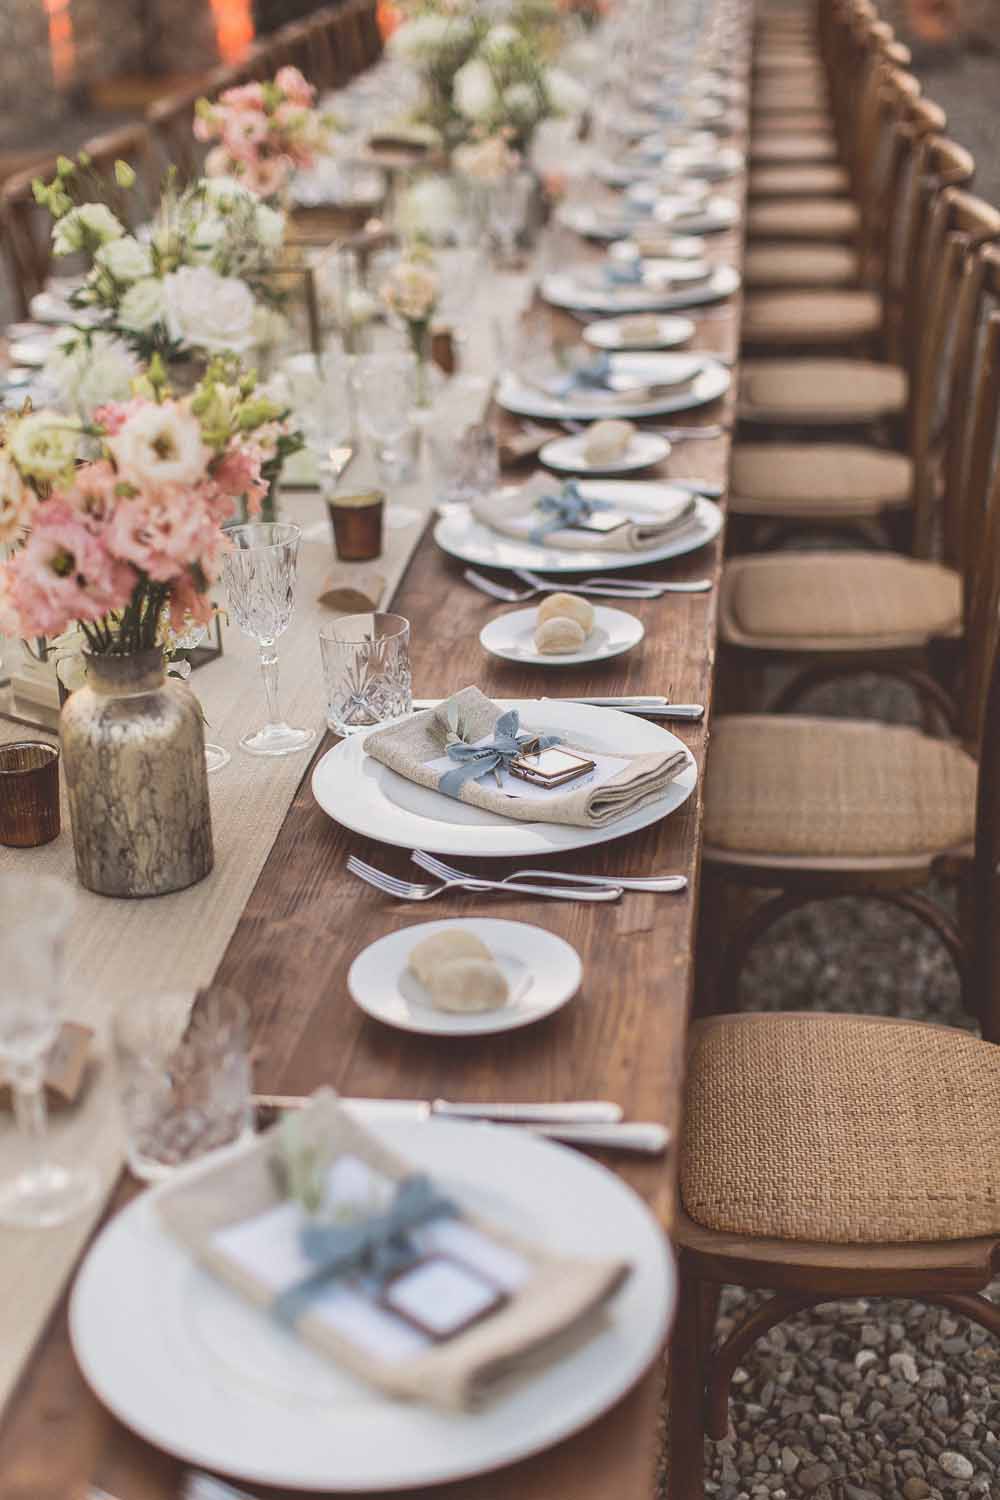 Brass Bronze Wedding Centrepieces Table Styling Florals by Passion for Flowers, Lanterns, Vases & Decor The Wedding of my Dreams